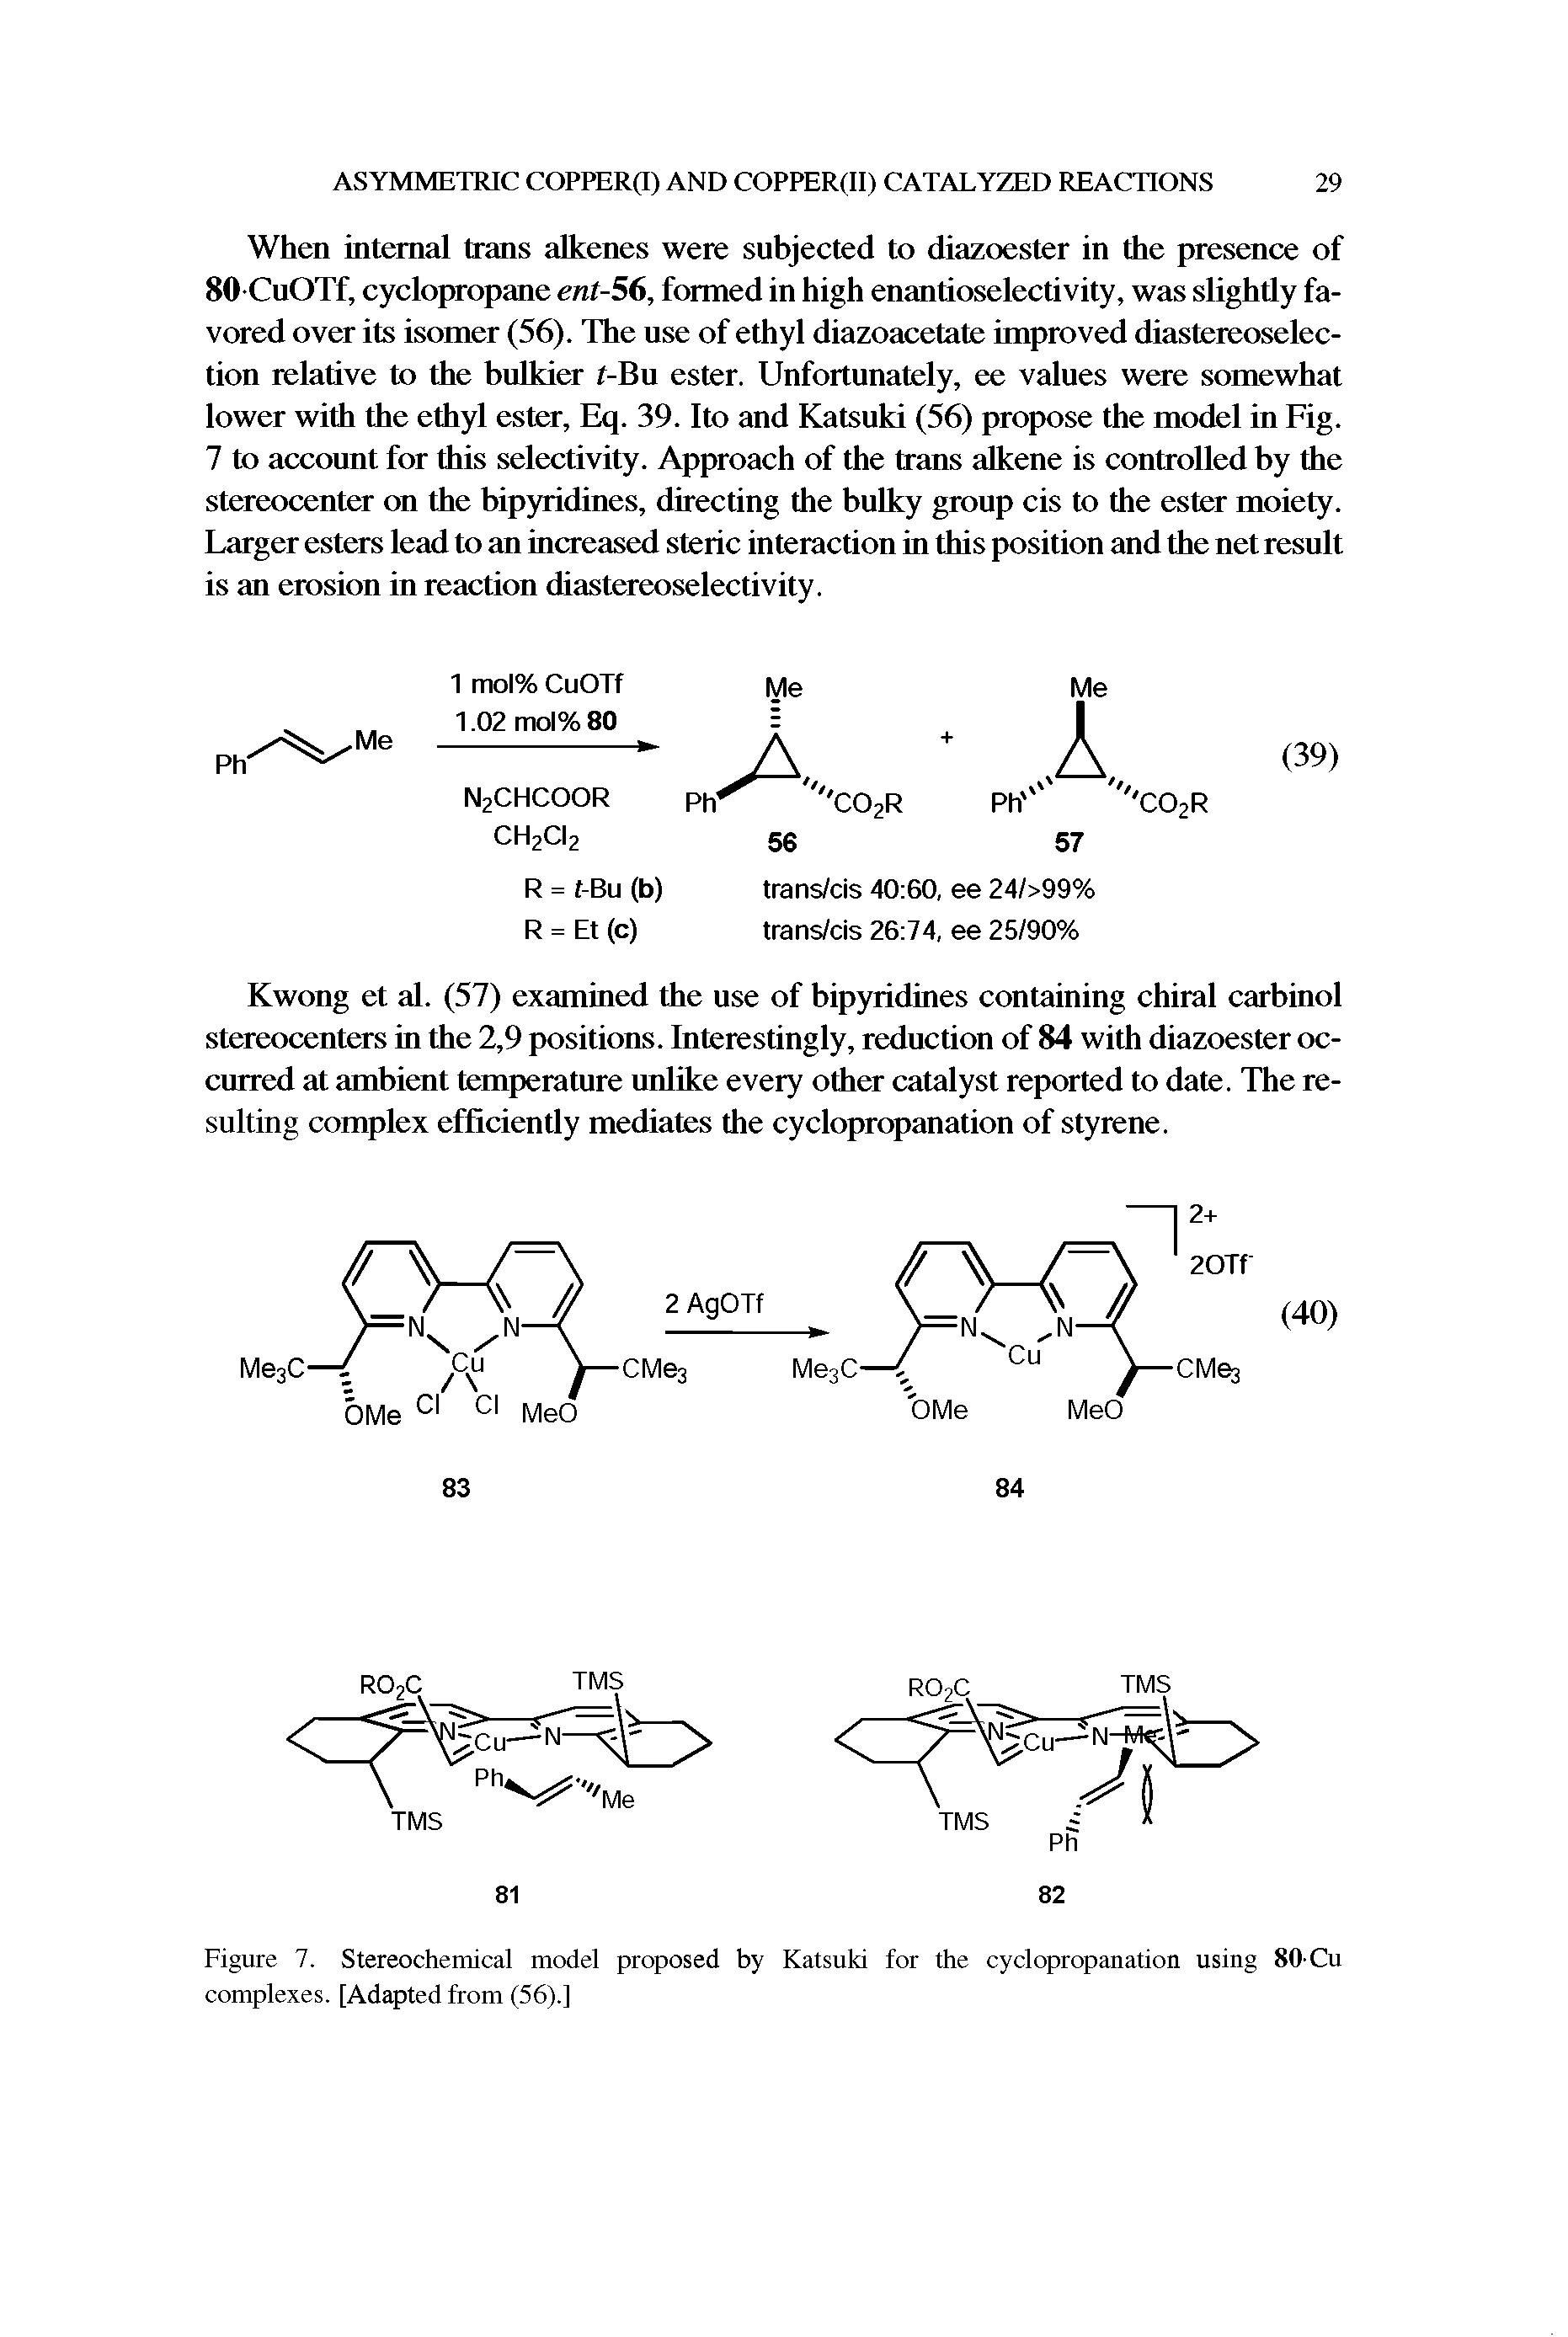 Figure 7. Stereochemical model proposed by Katsuki for the cyclopropanation using 80-Cu complexes. [Adapted from (56).]...